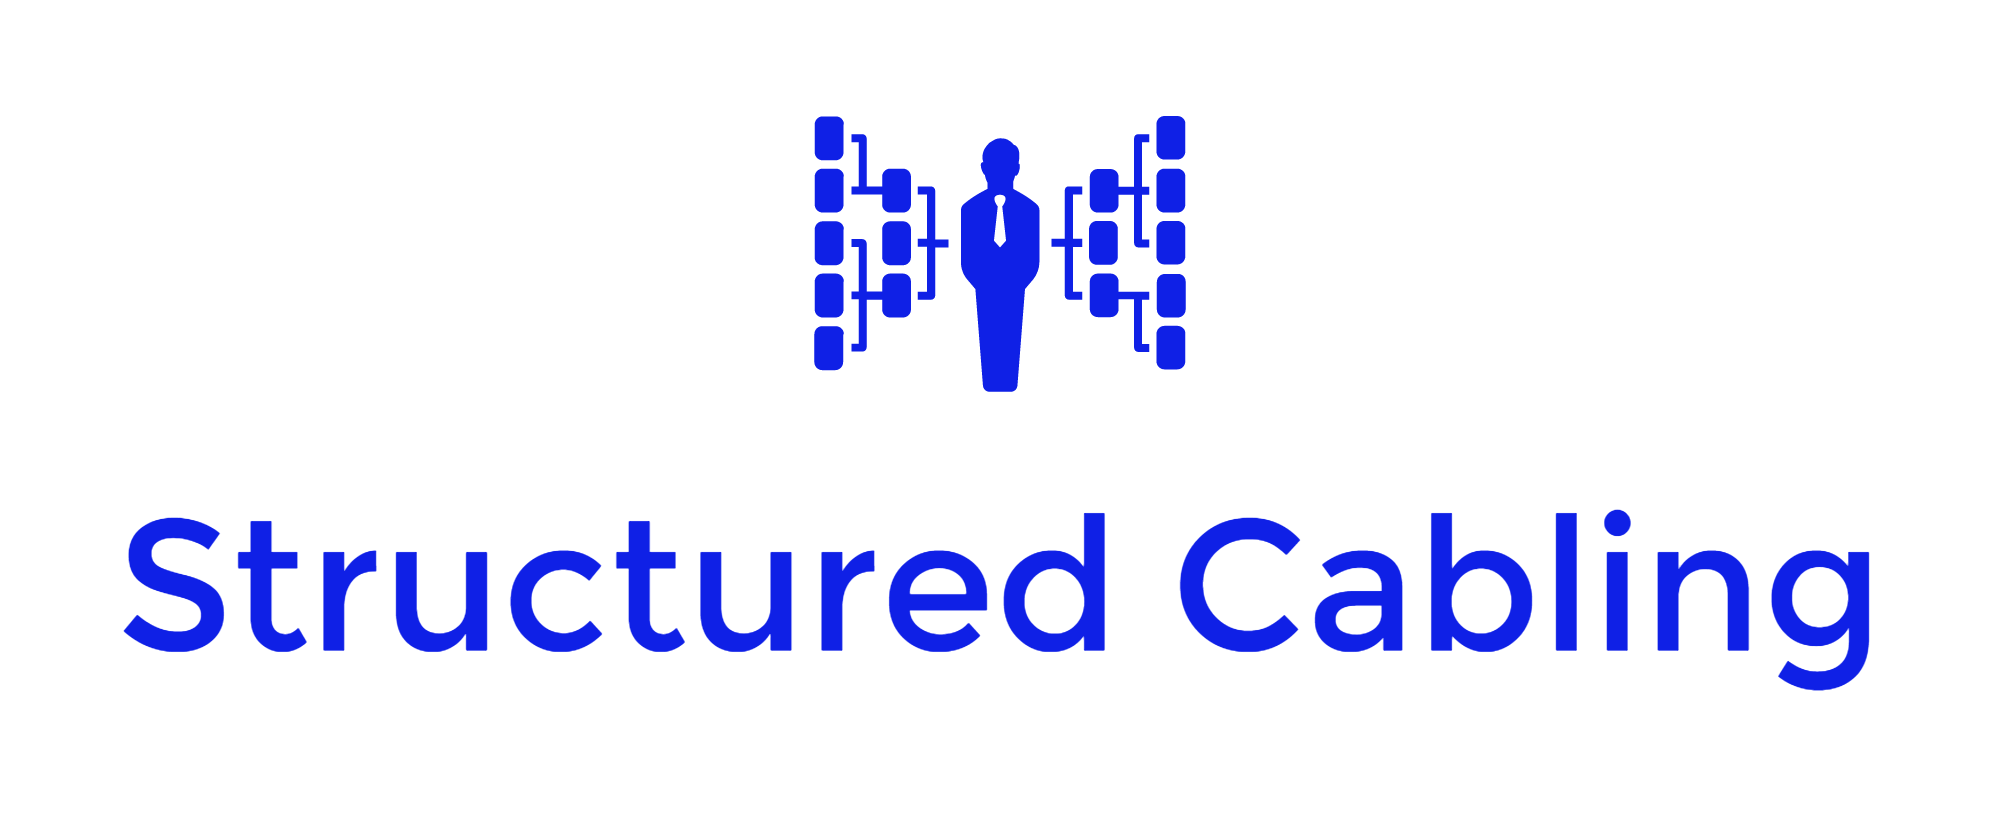 Structured Cabling-logo.png